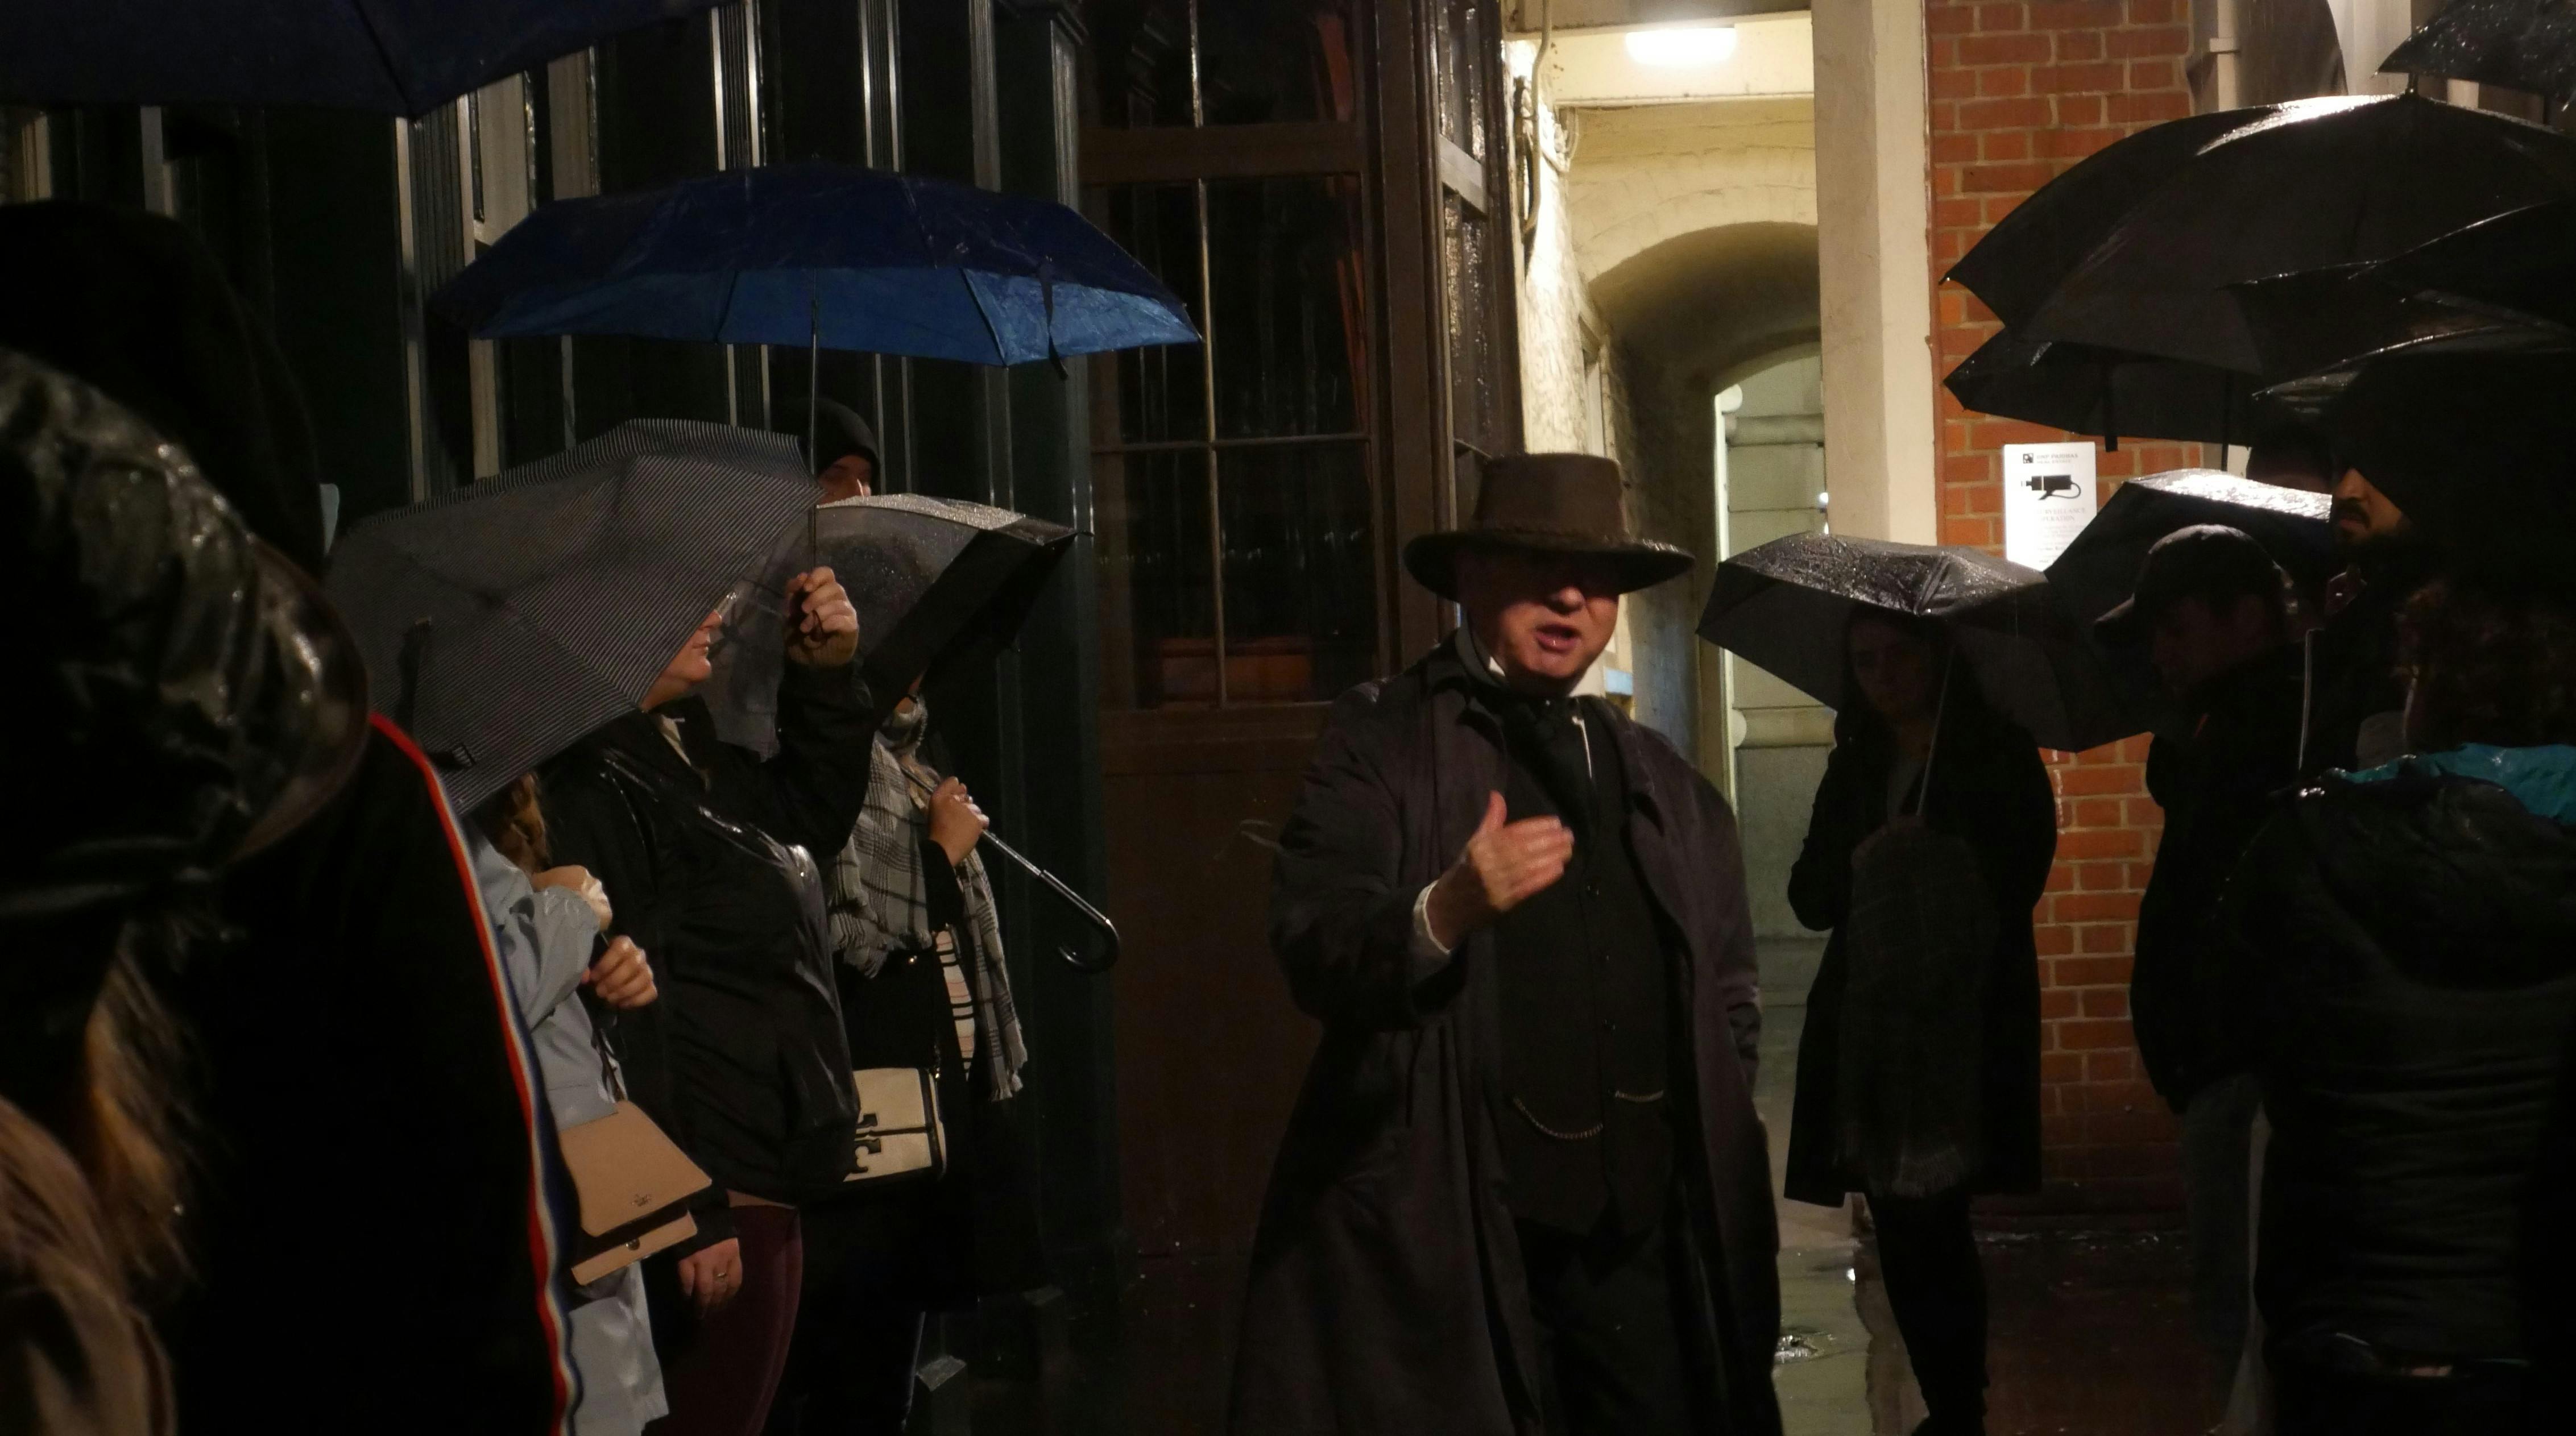 Ghost tour of London